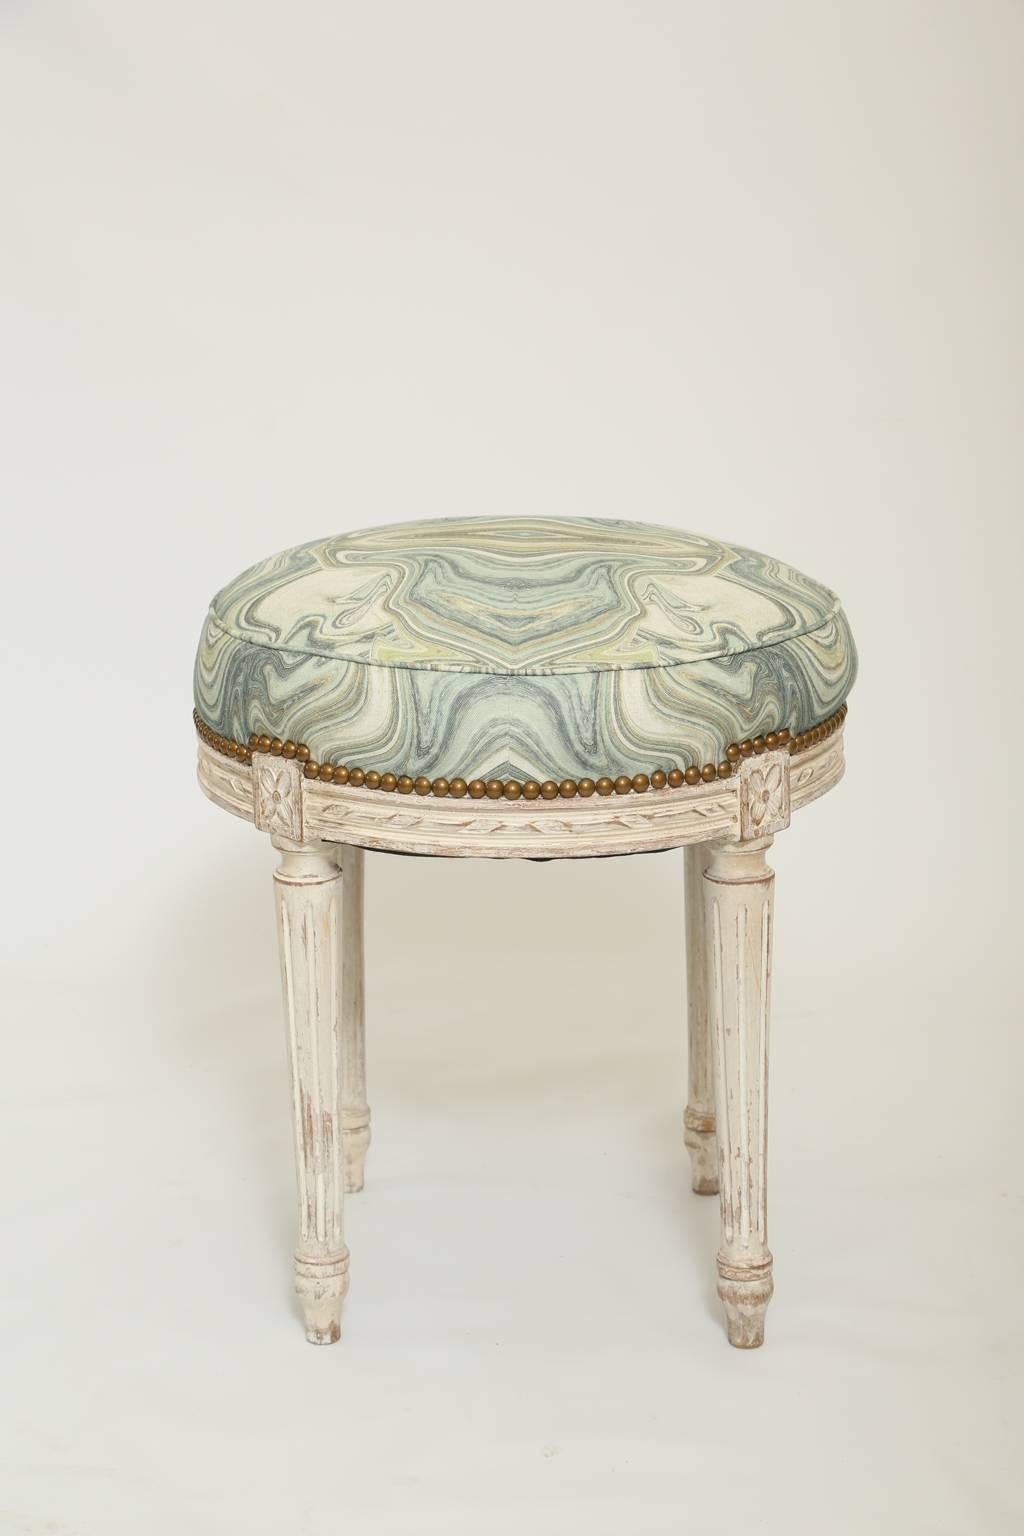 Ottoman, having a round, crown seat with nailheads, on a painted frame, with natural wear, its apron carved with ribbons and rosettes, raised on round, tapering, fluted legs, ending in touipe feet. 

Stock ID: D1485.